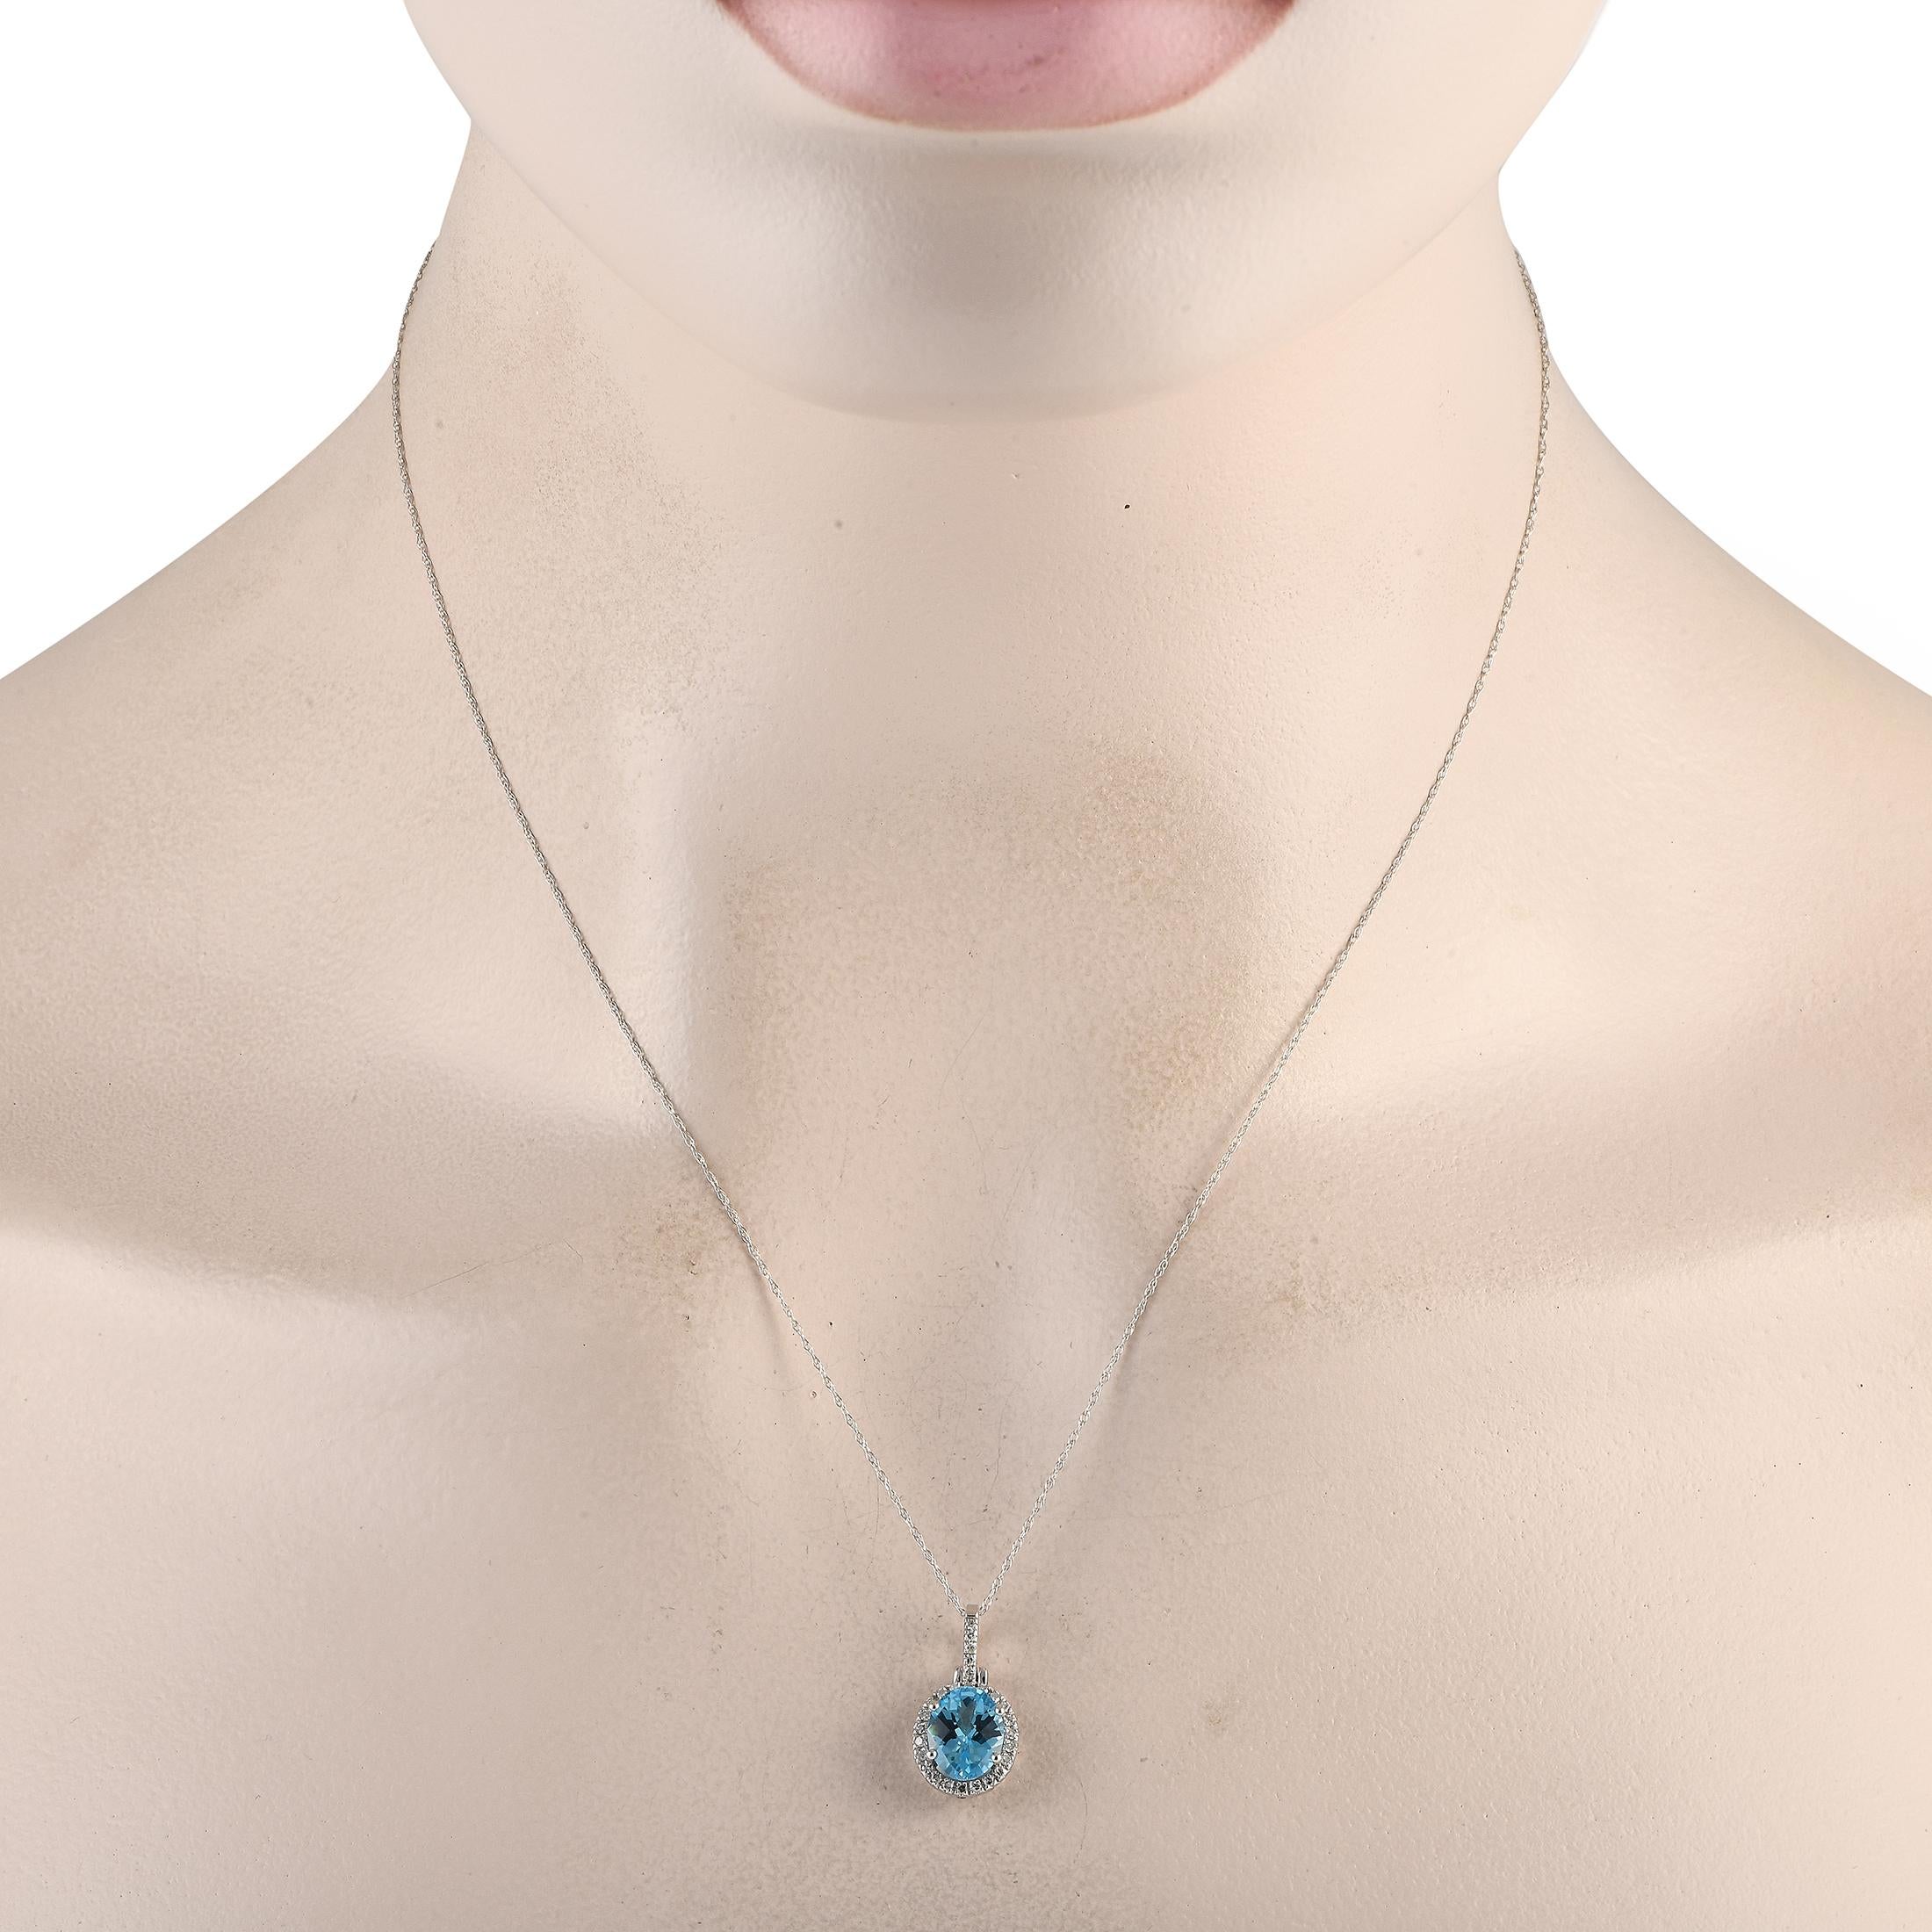 This luxury necklace is a timeless piece that will continually impress. Suspended from a delicate 18 chain, youll find a simple, elegant pendant measuring 0.75 long by 0.45 wide. Its elevated by a breathtaking blue topaz center stone and diamond